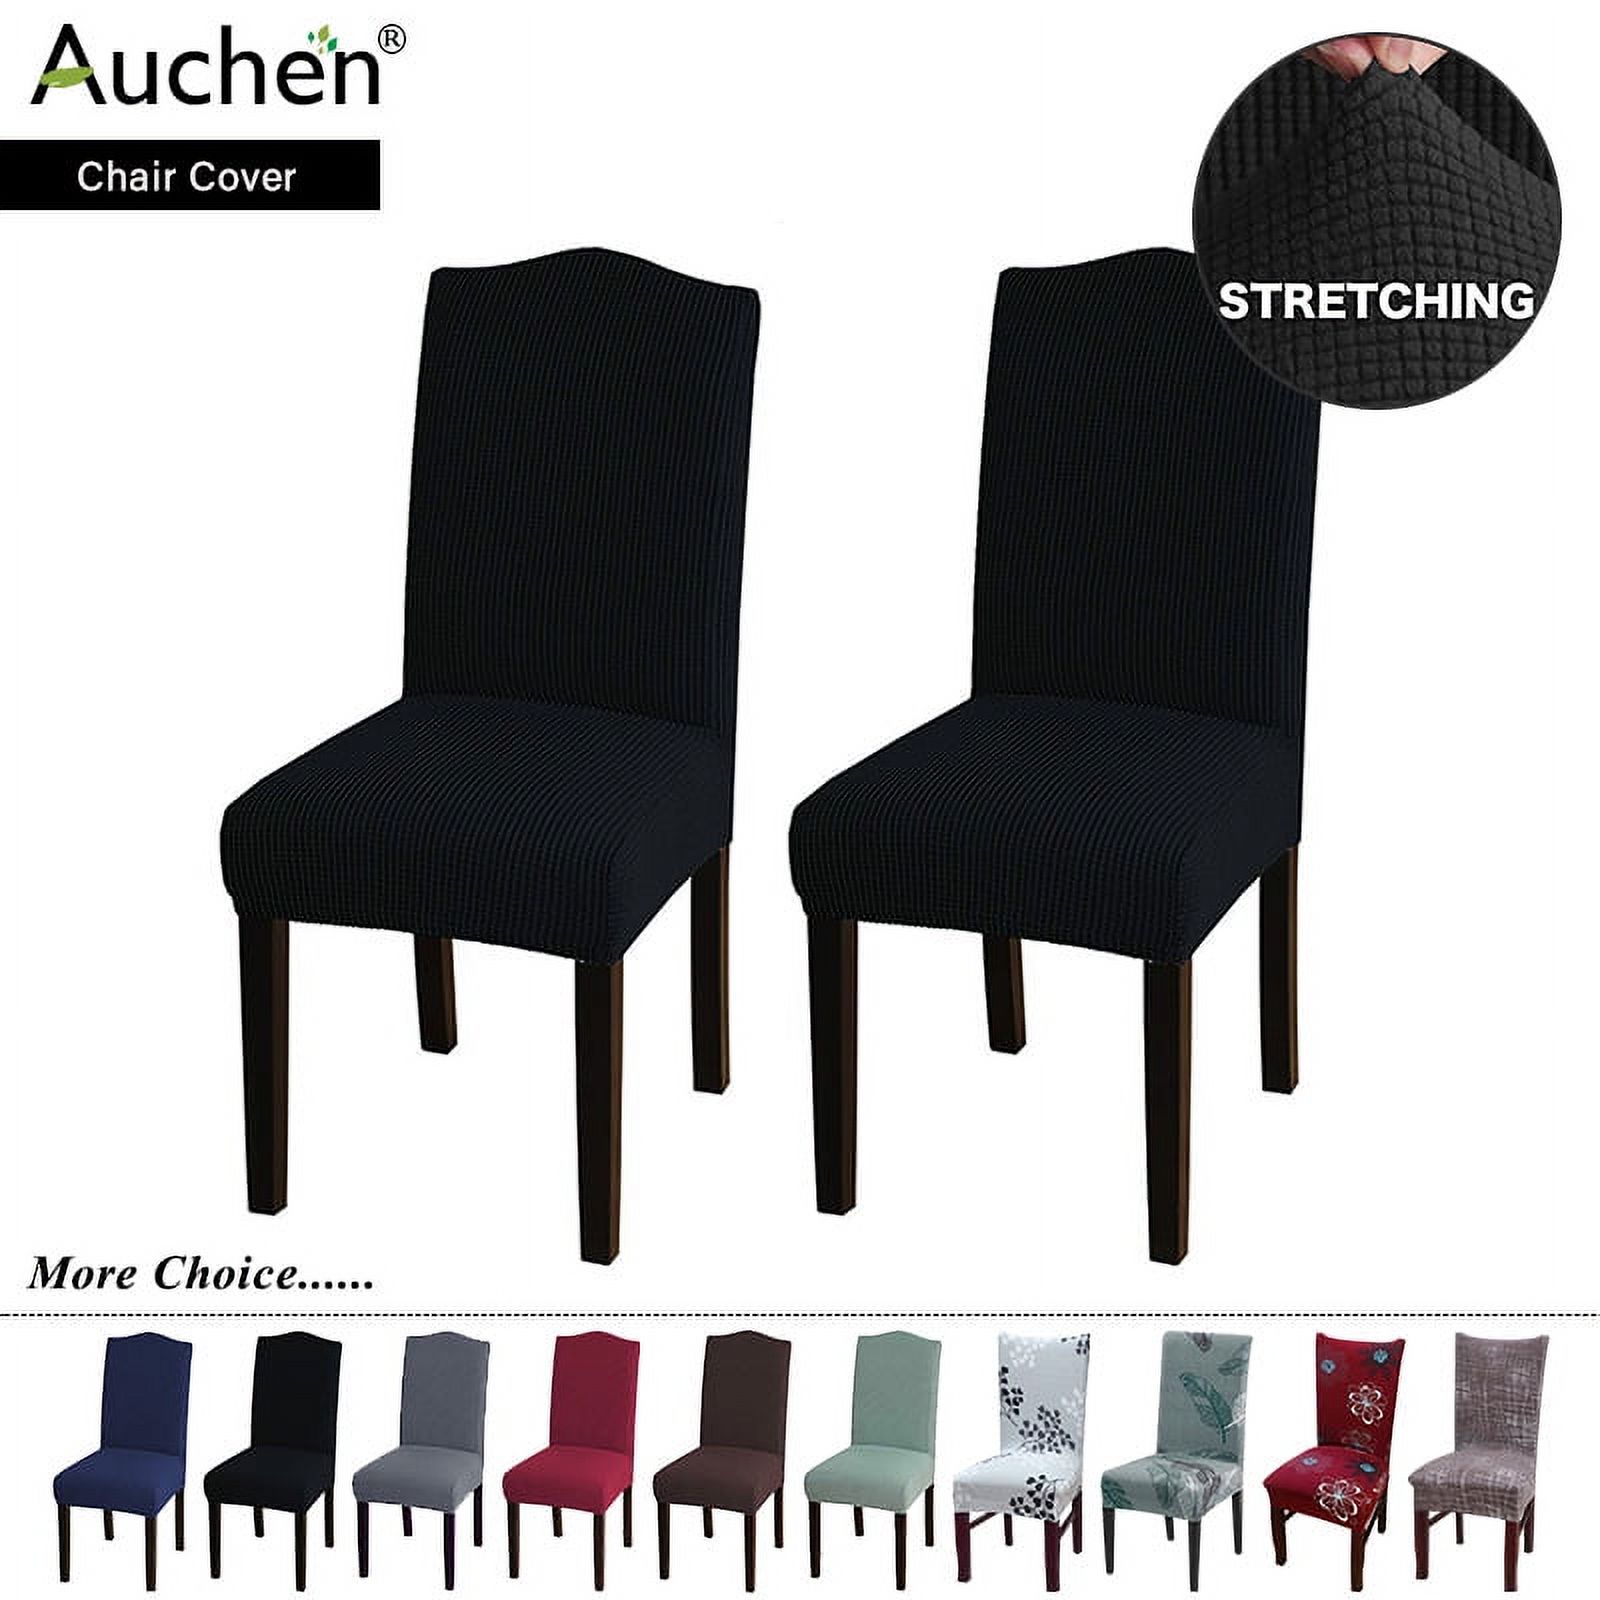 Chair Slipcover, AUCHEN Super Stretchy Dining Chair Covers Set of 2, Parsons Chair Protector Covers Chair Covers for Dining Room, Furniture Protector Covers for Restaurant Hotel Ceremony (Black) - image 1 of 9